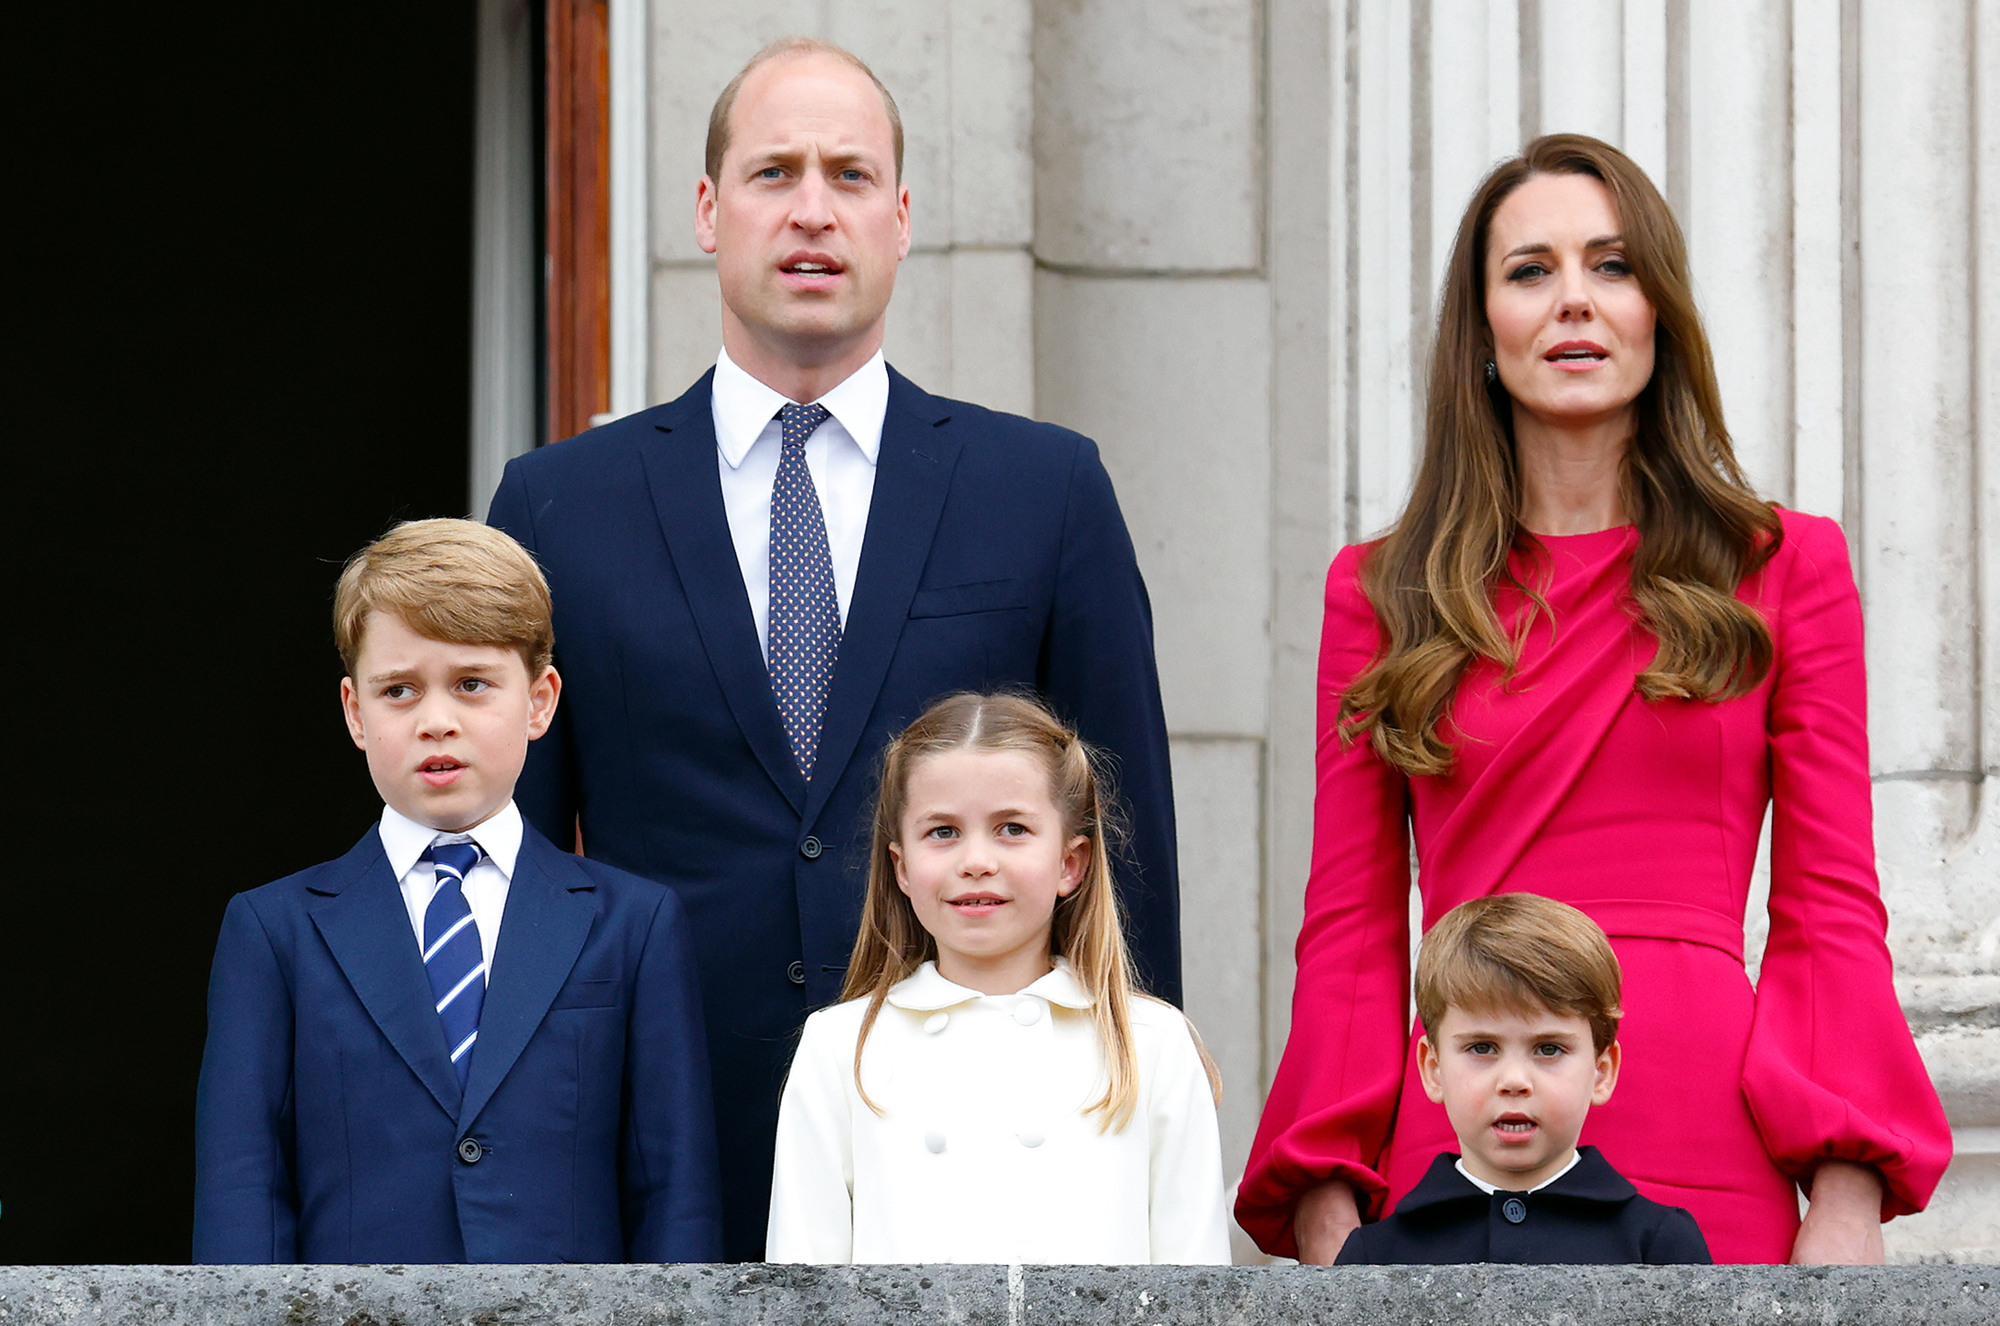 How Kate Middleton Could Speak to Her Kids About Cancer Battle: Expert